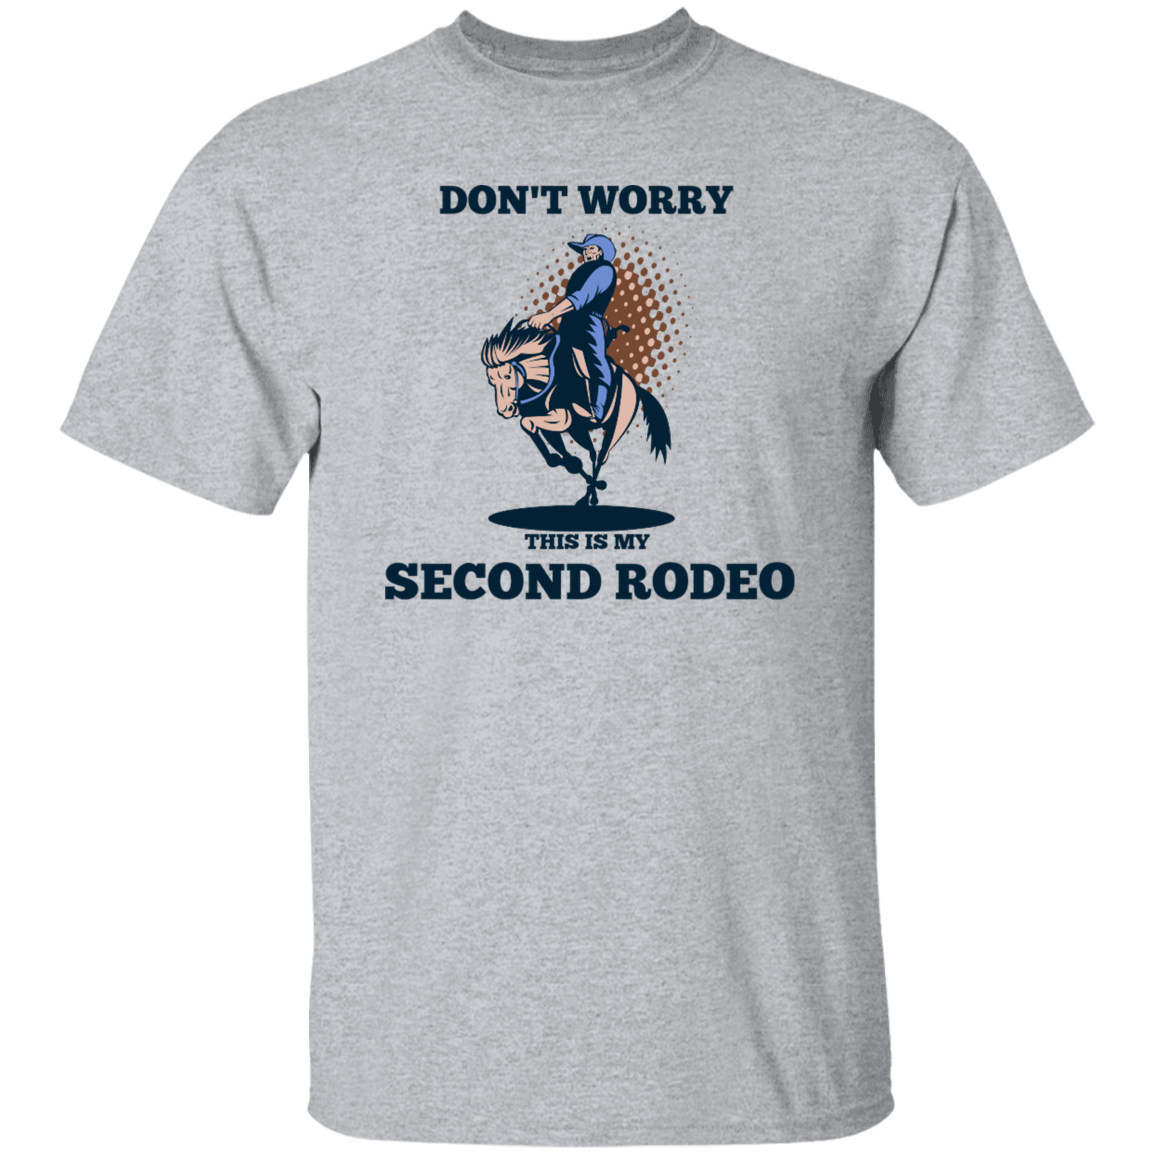 Second Rodeo T-Shirt